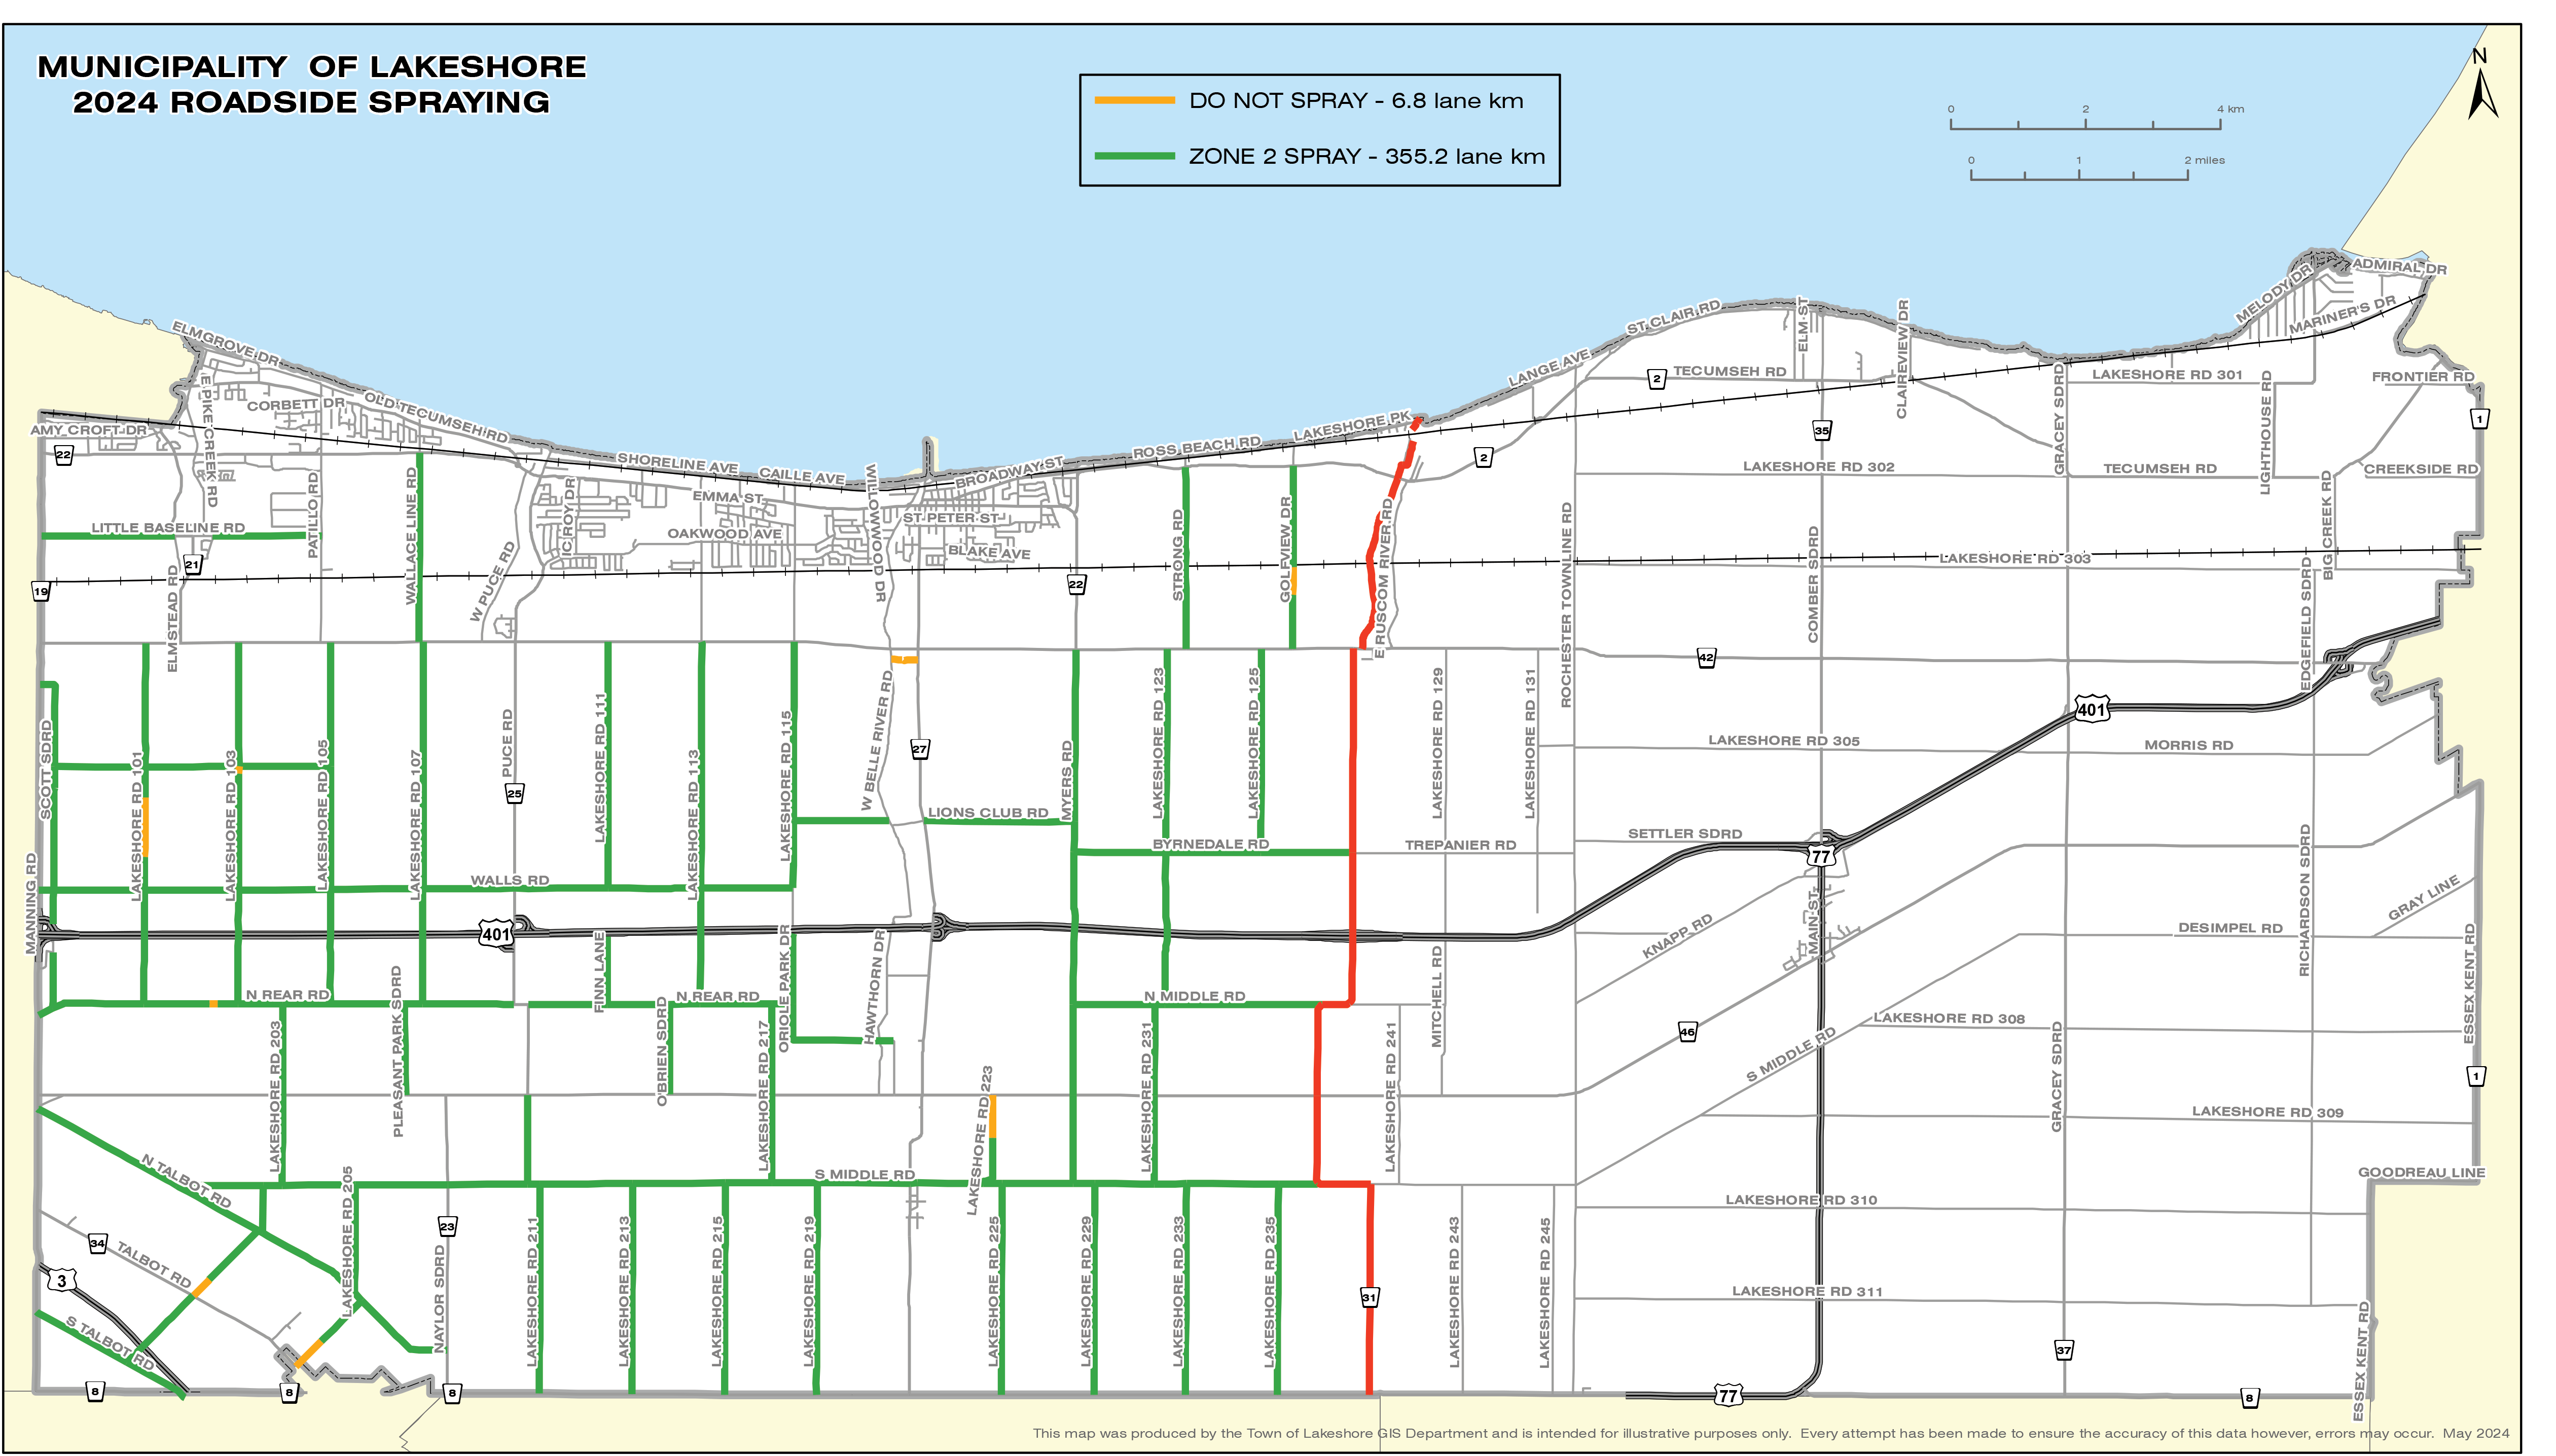 Selected Roadsides within the Municipality of Lakeshore Jurisdiction, middle and west Lakeshore. 